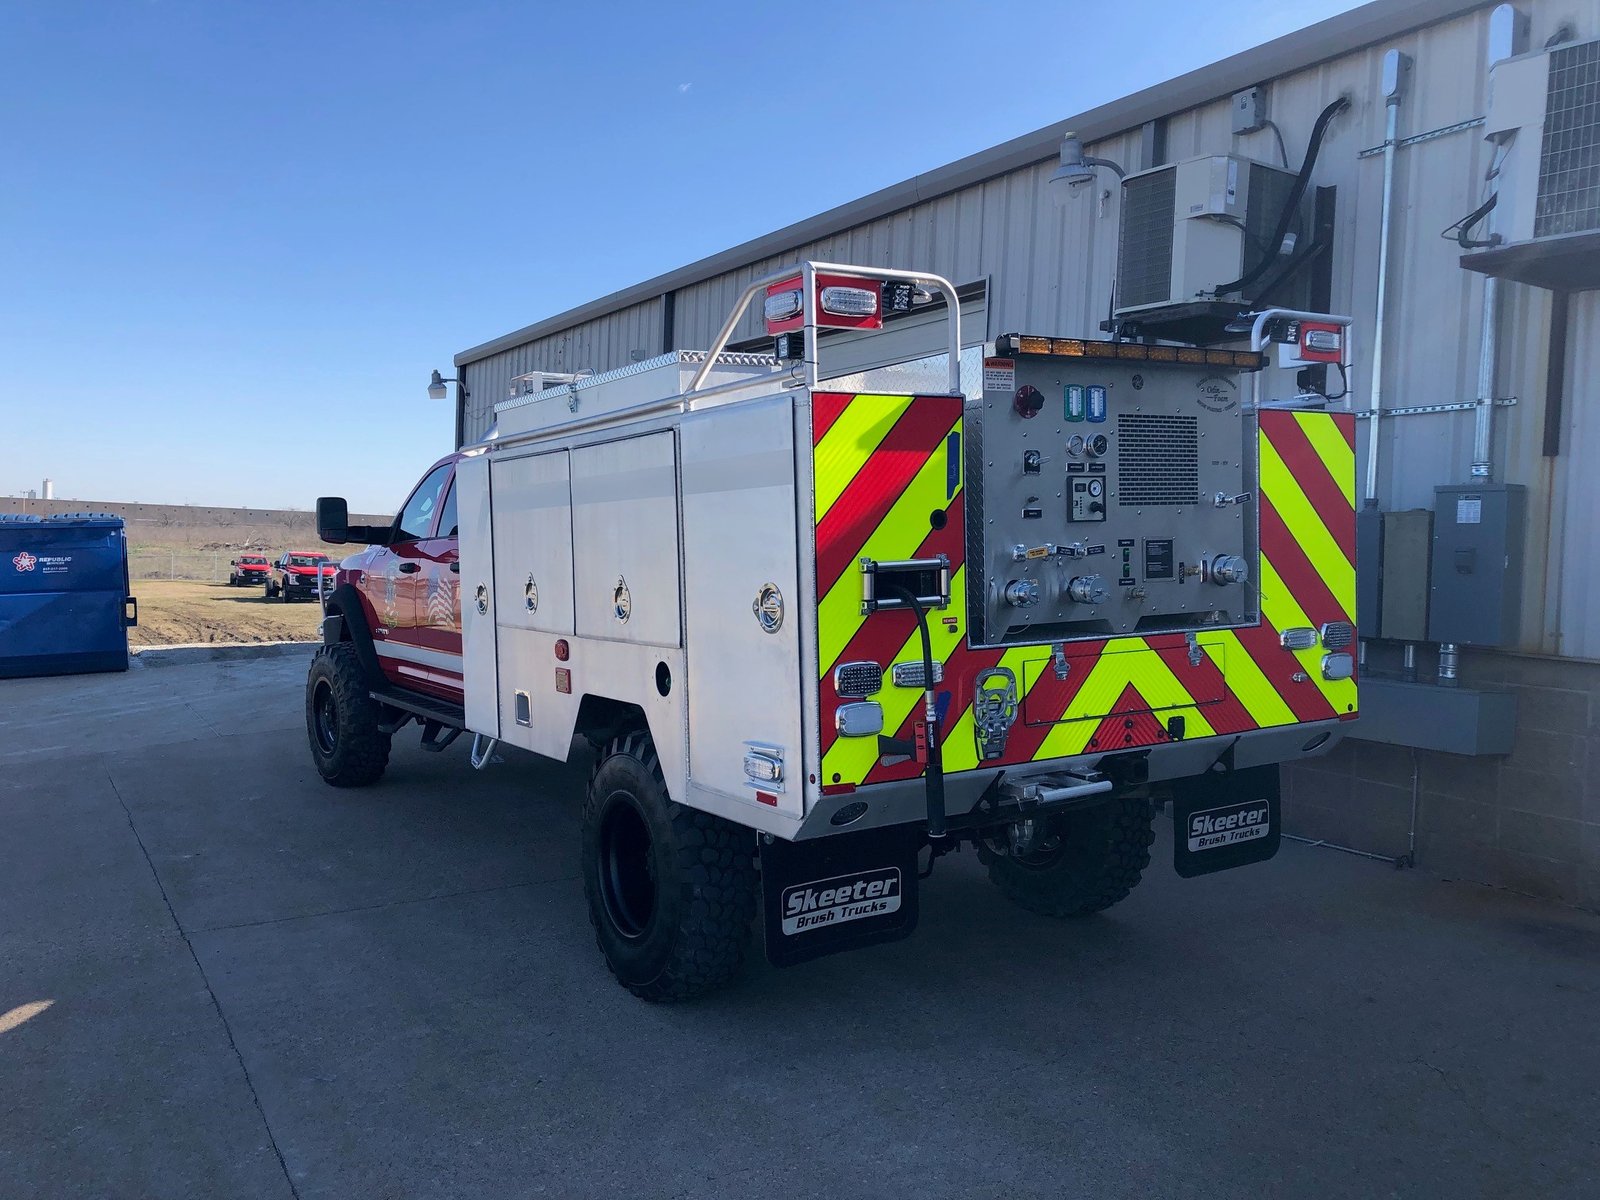 South Callaway Fire Protection District Skeeter Brush Trucks